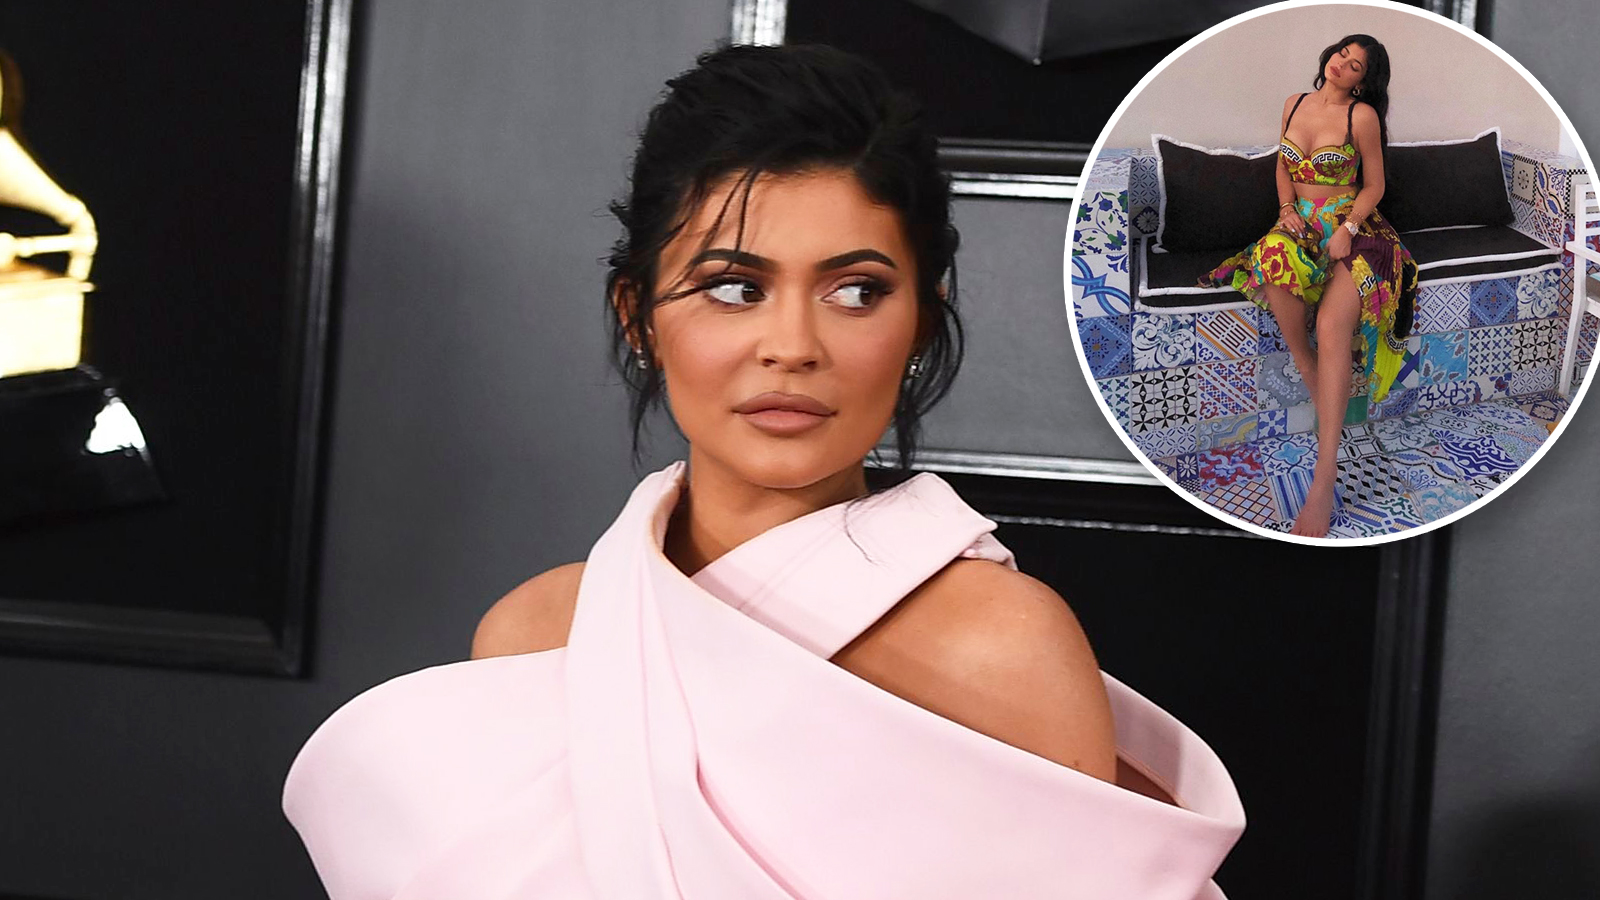 Kylie Jenner Photoshop Fail On Instagram Is Not What It Seems